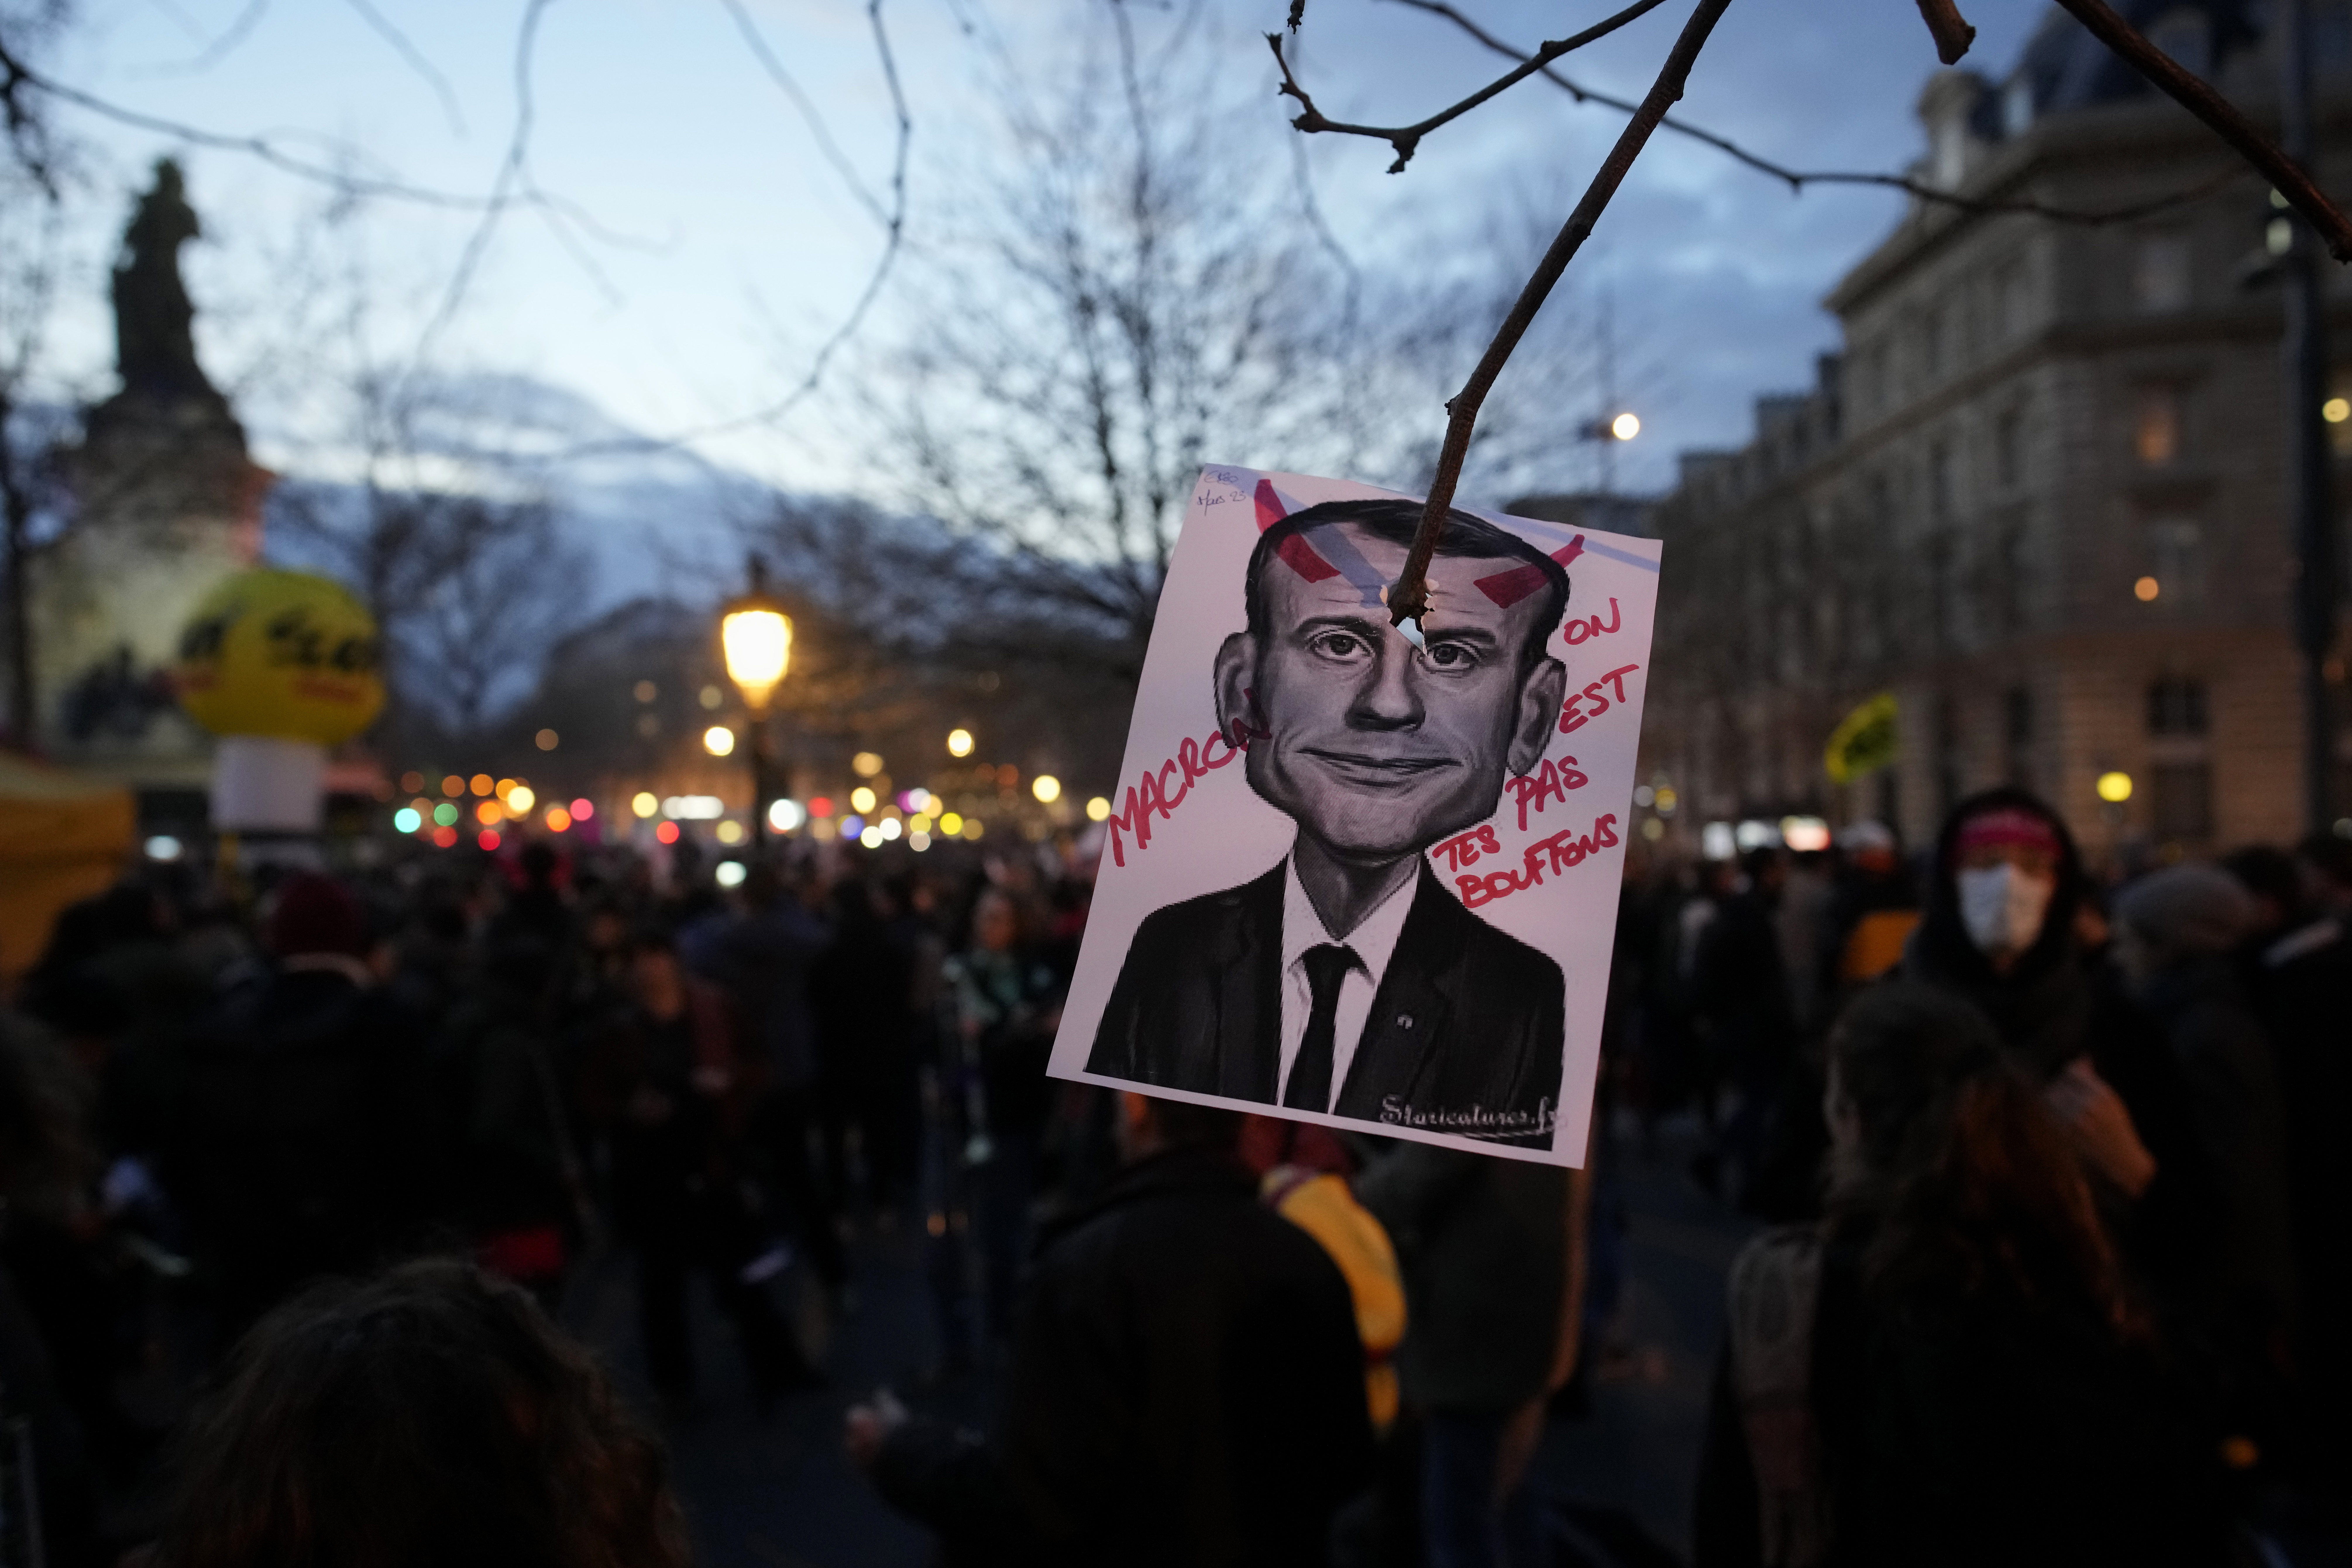 Protesters in France storm headquarters of the world's richest man. See pics